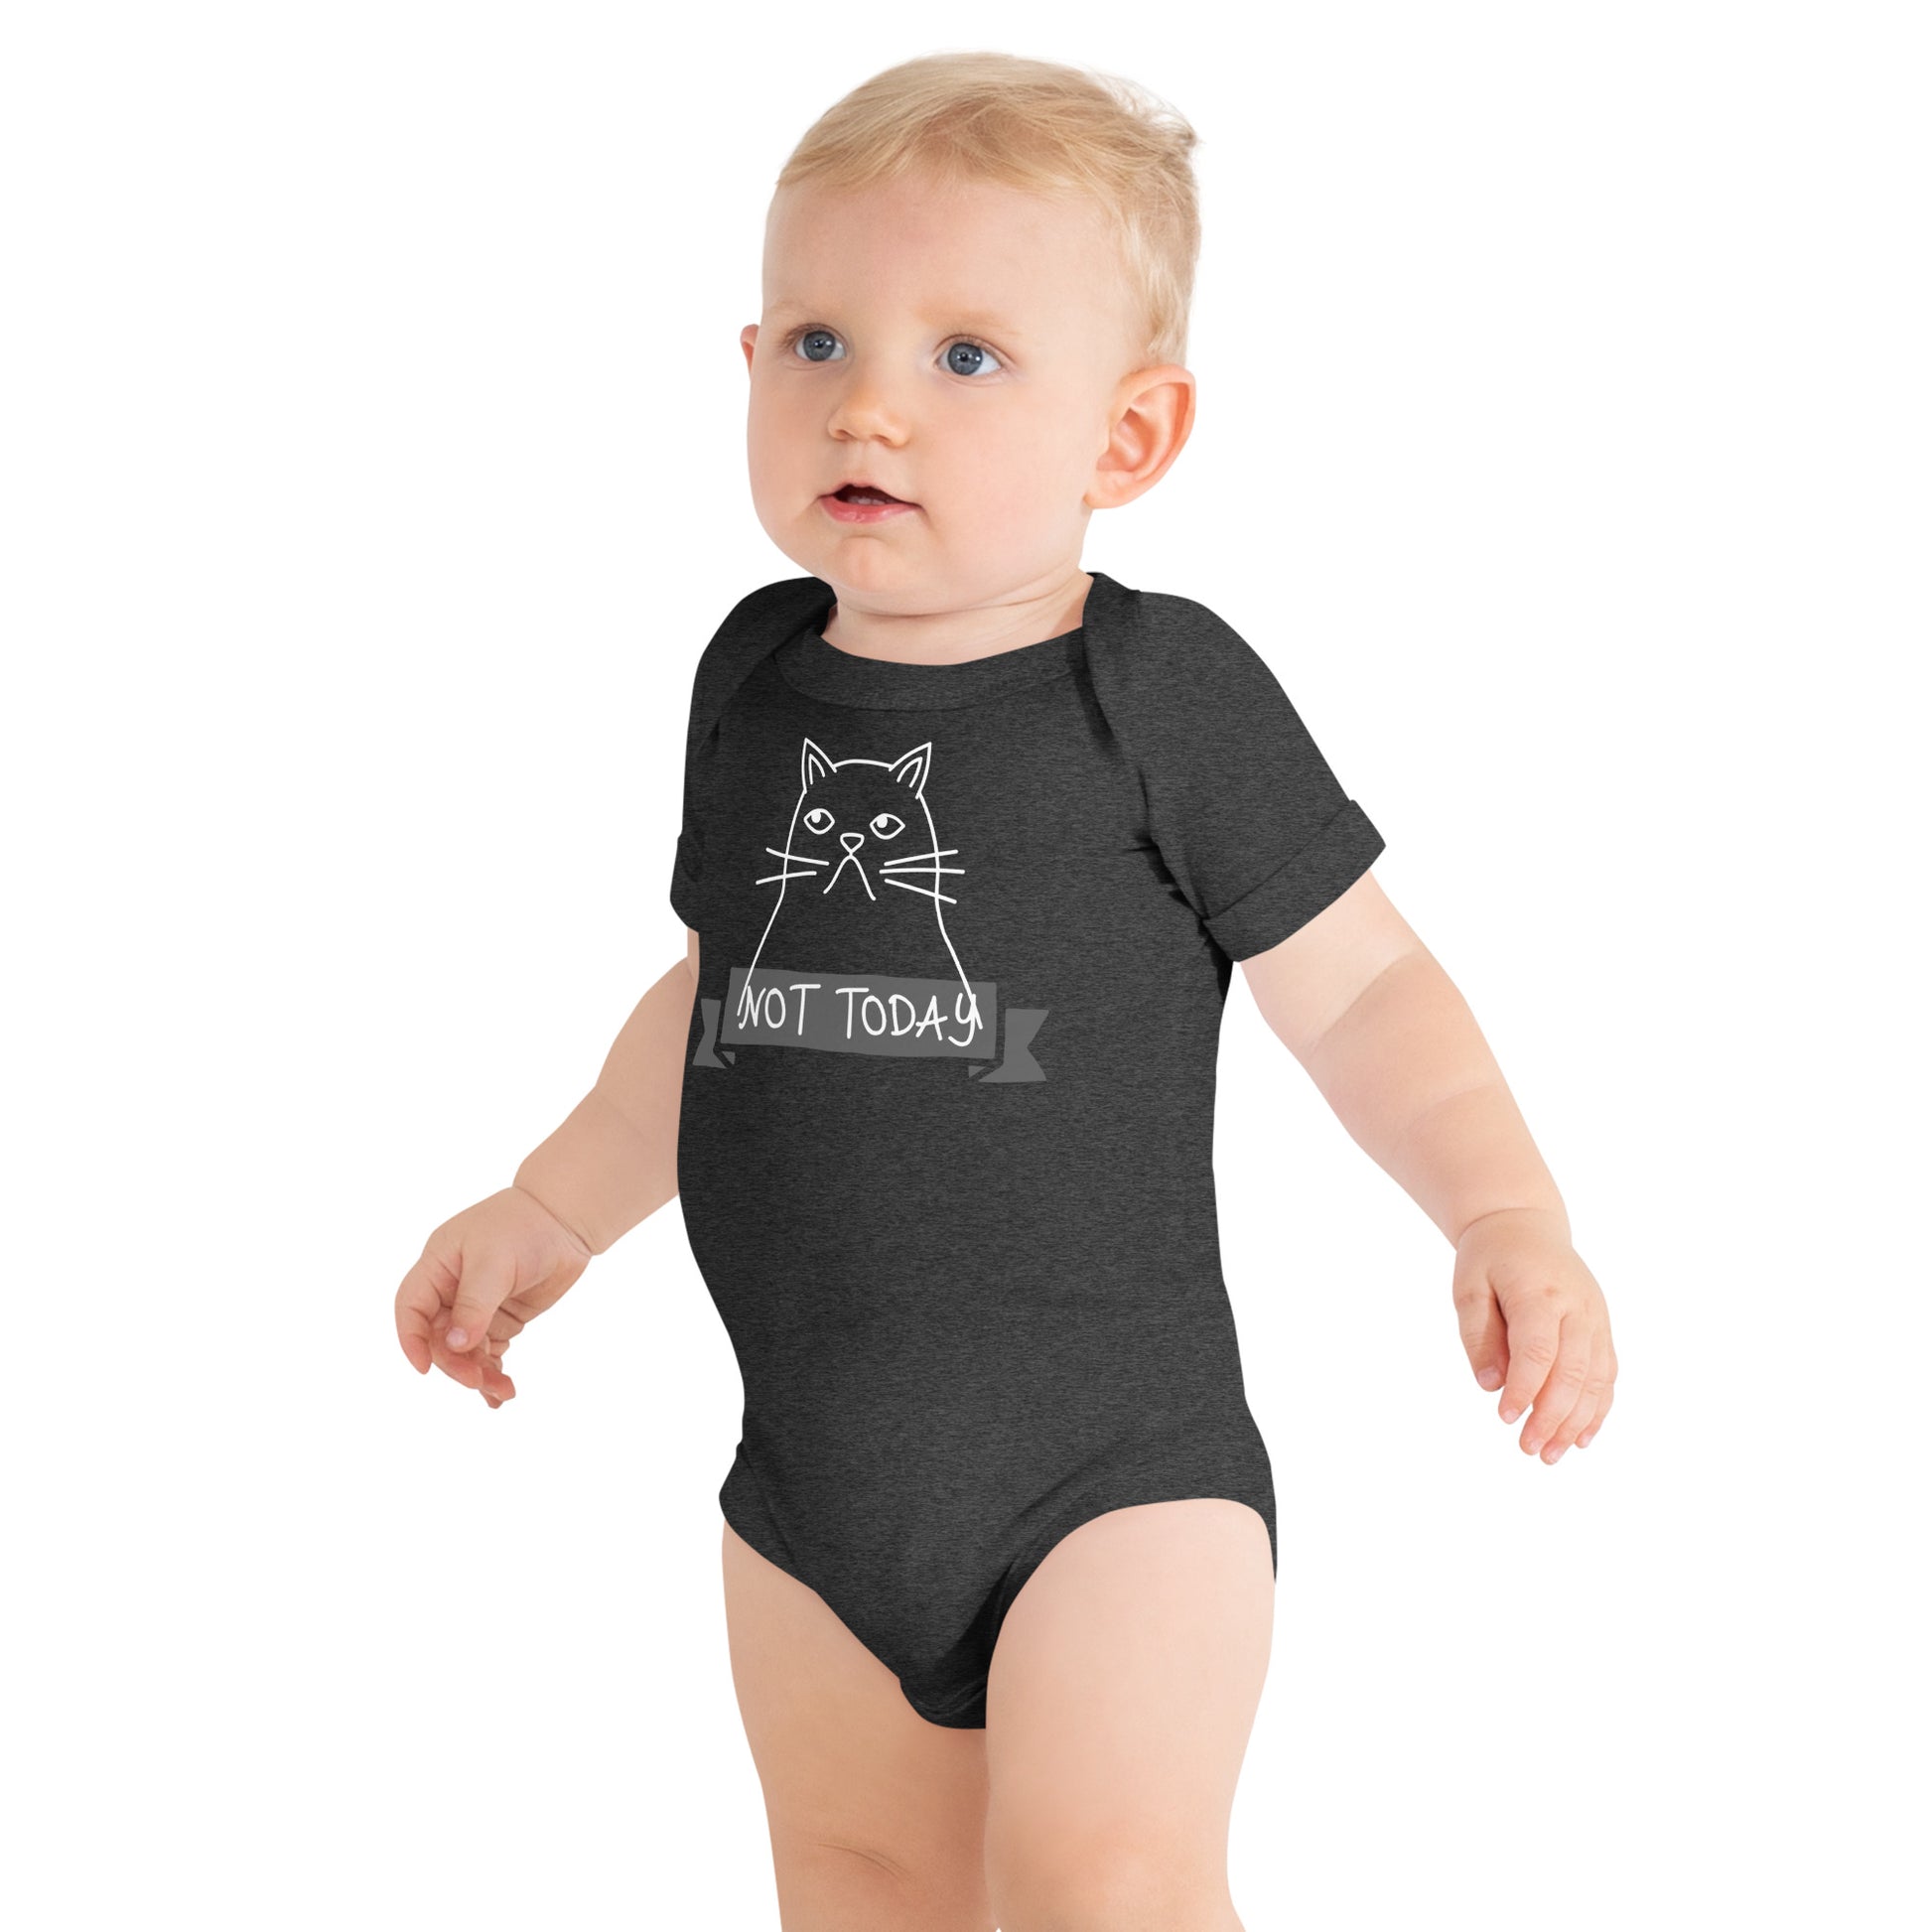 baby with dark gray one piece with drawing of a cat and text "Not today"